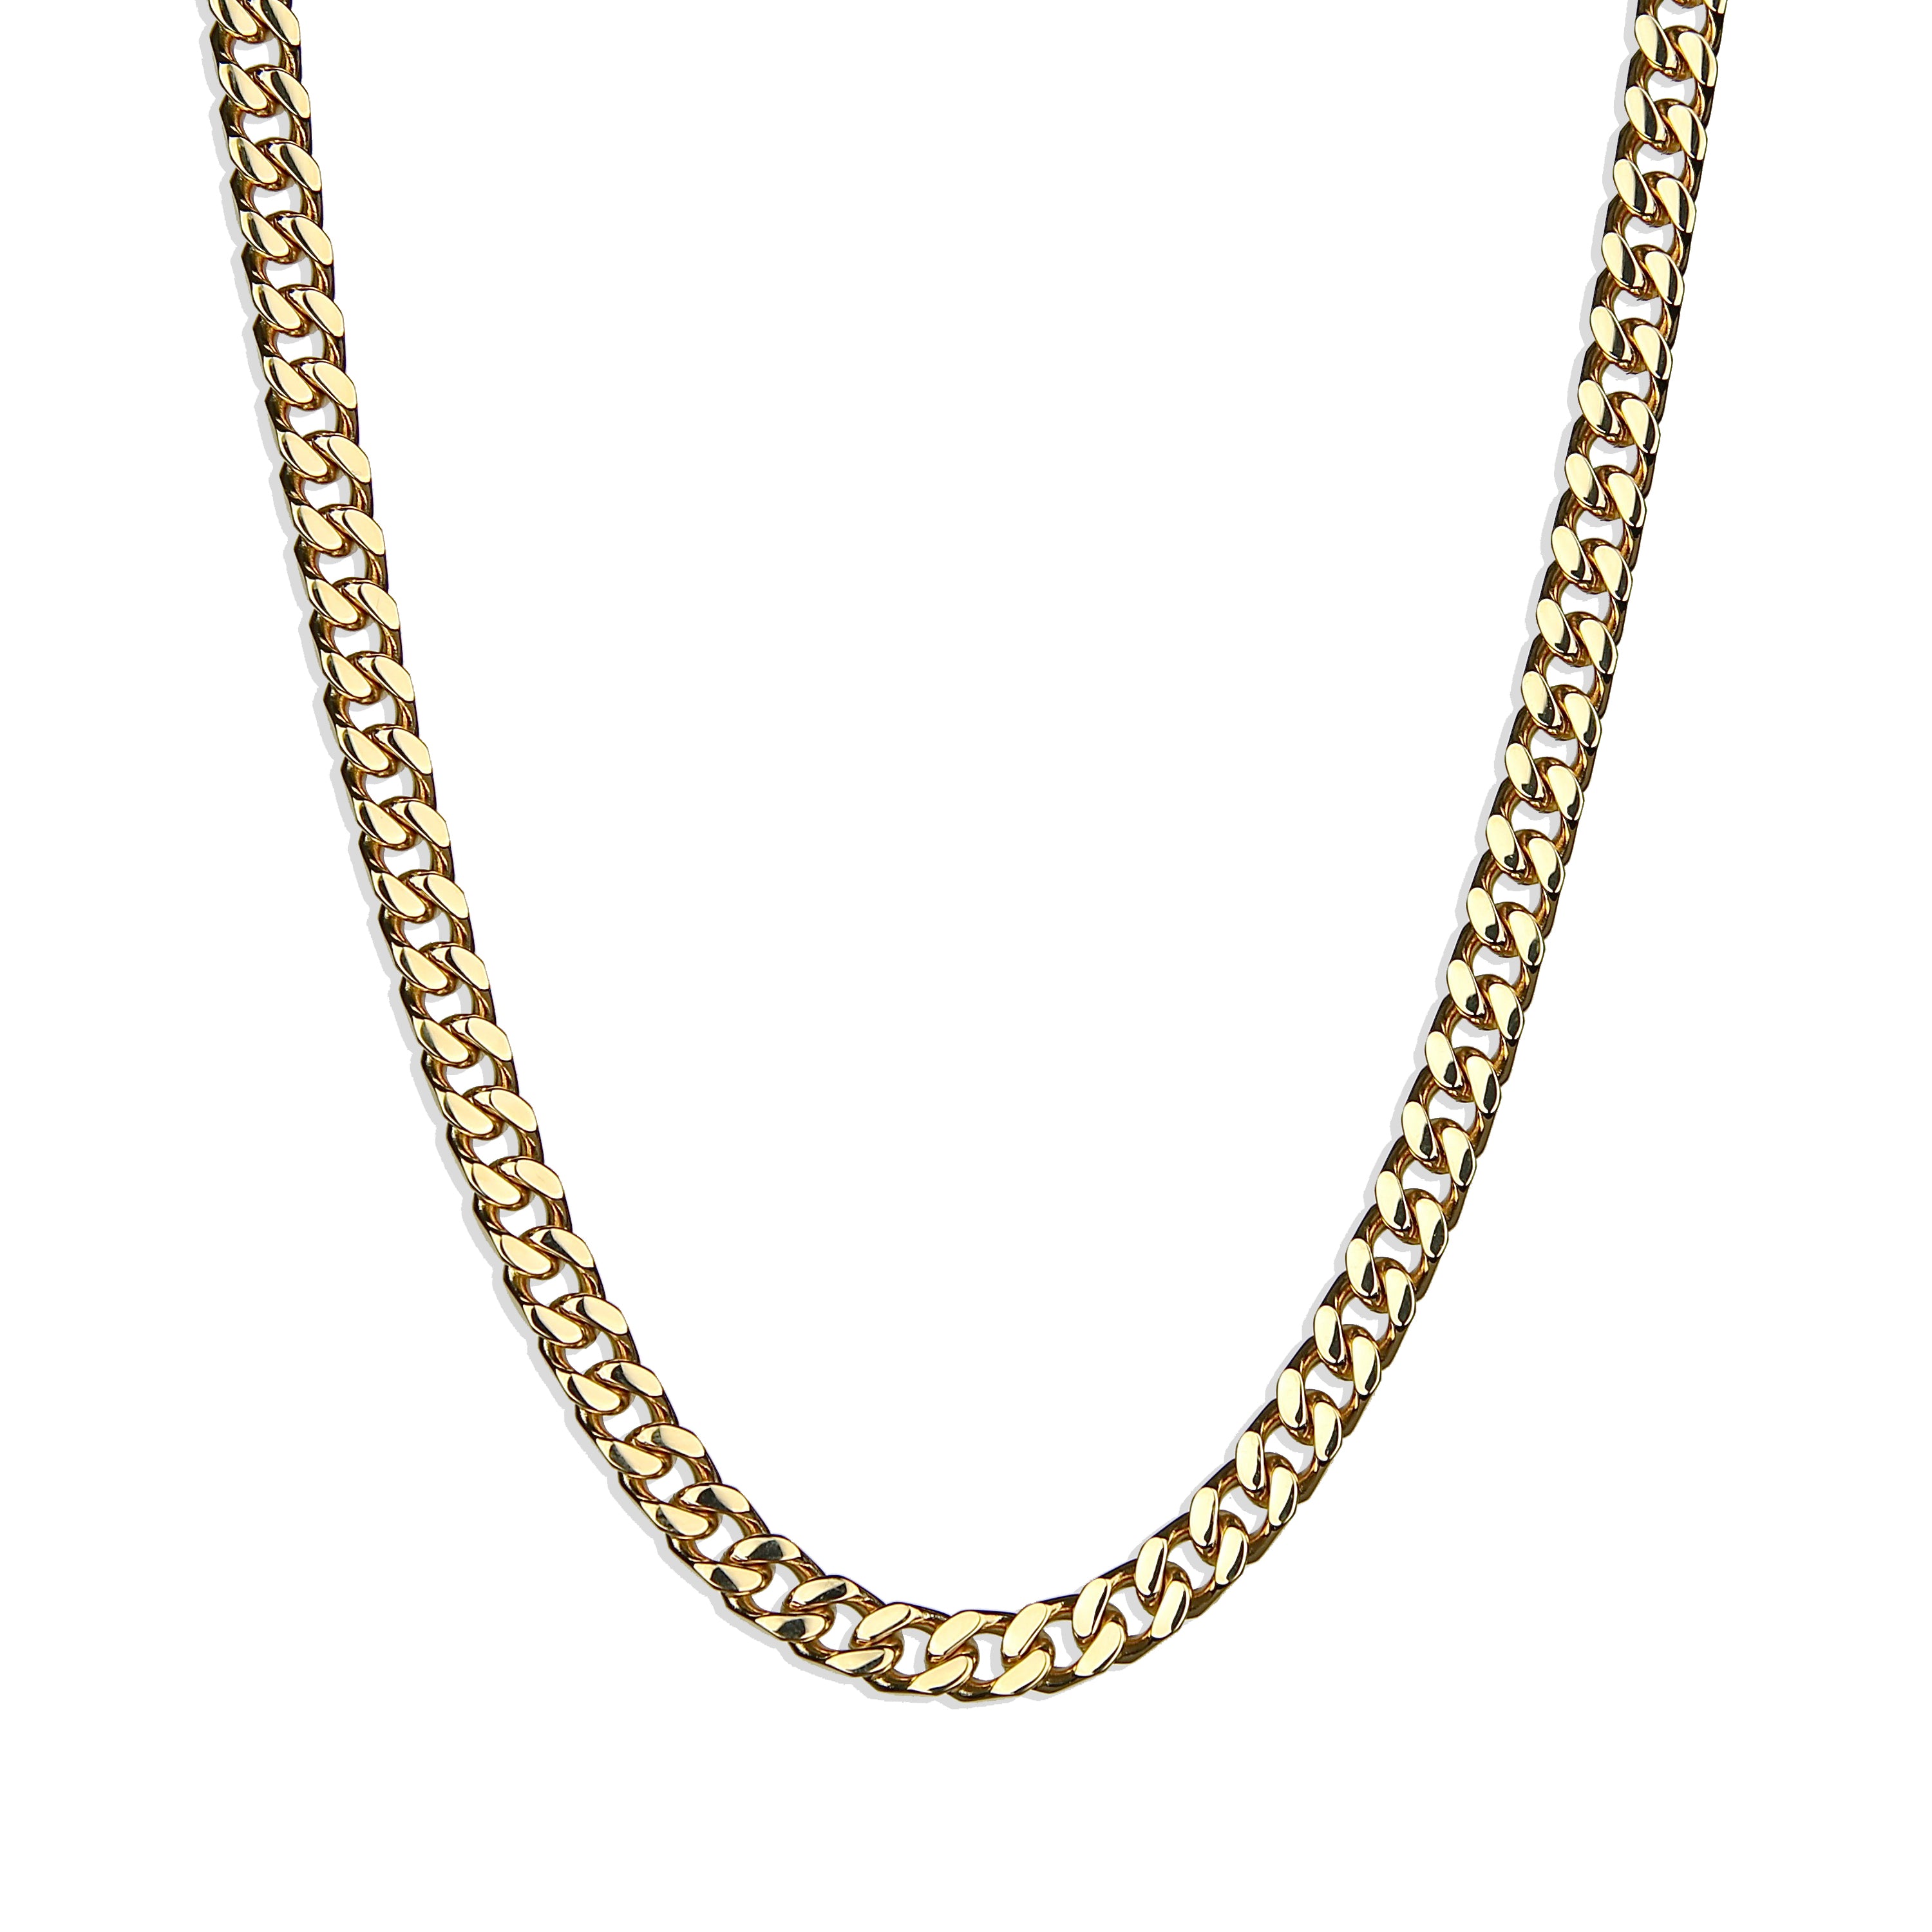 Curb Chain Necklace - Gold 6mm